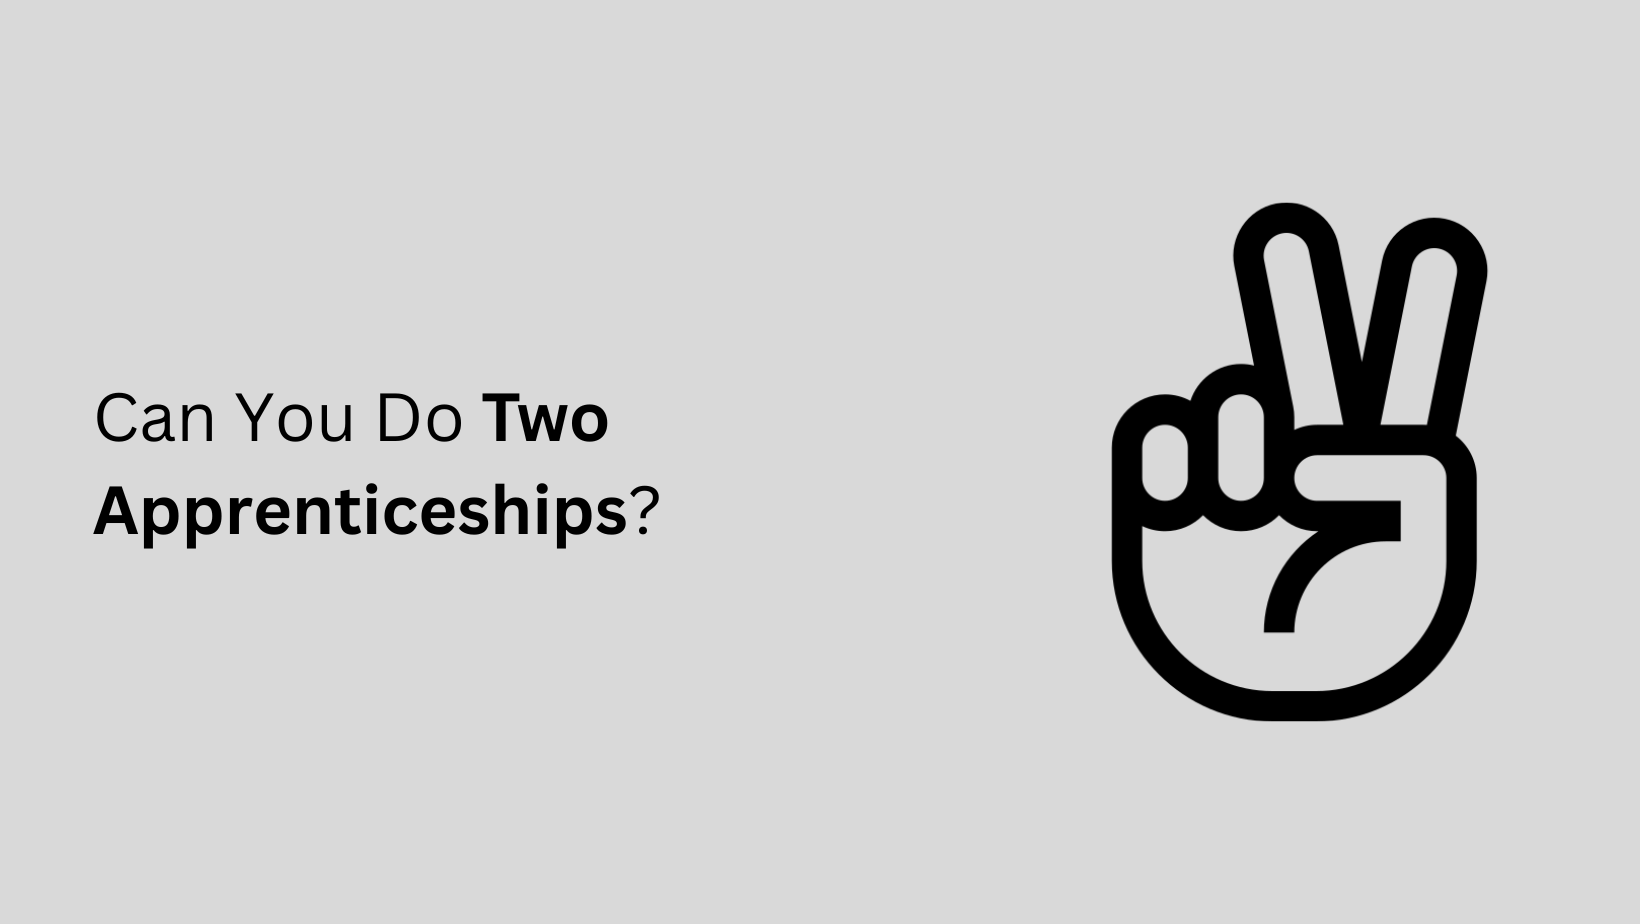 Can You Do Two Apprenticeships